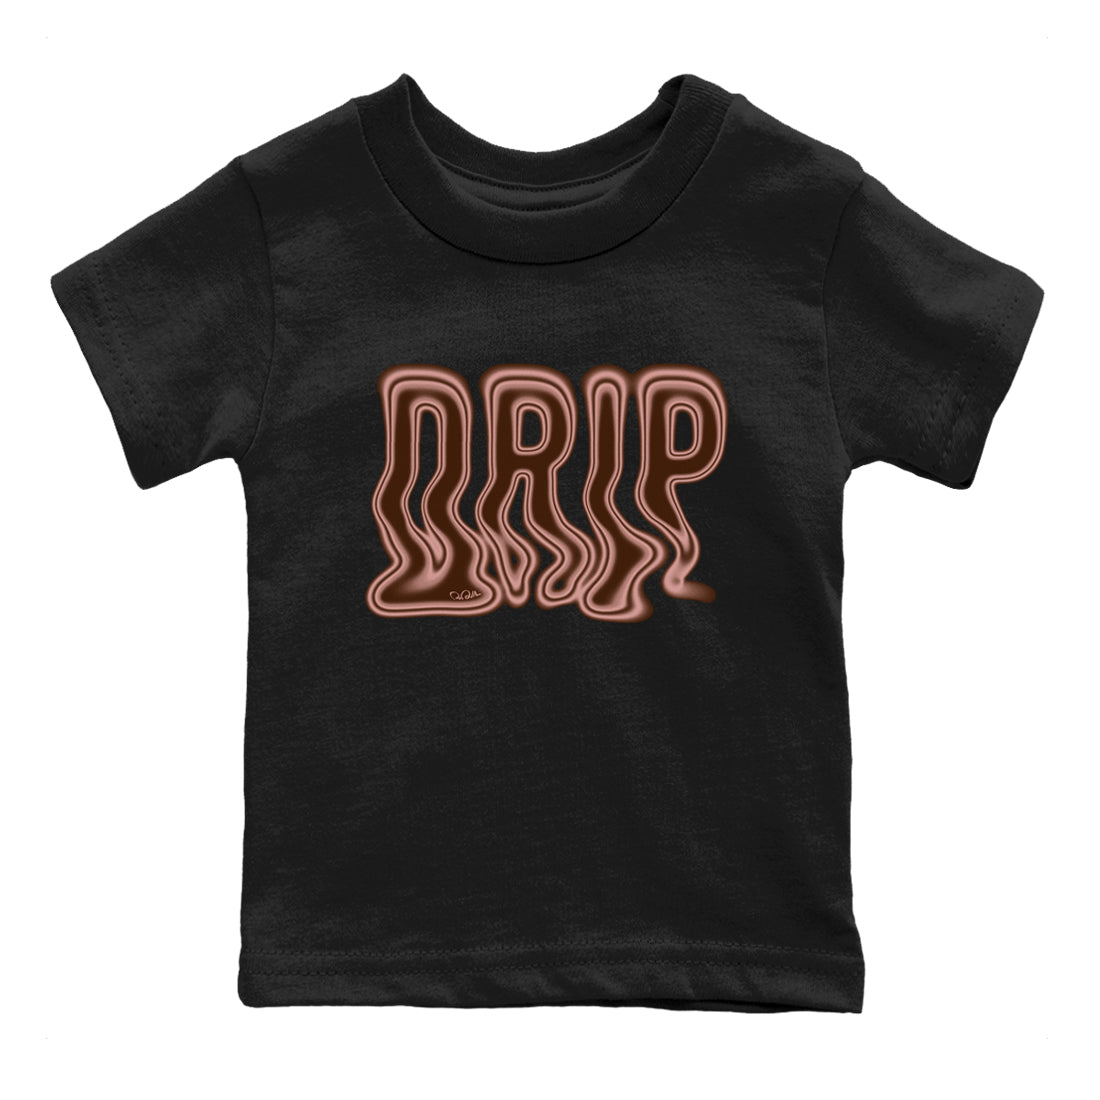 Air More Uptempo Valentines Day Sneaker Tees Drip Gear Zone Drip Sneaker Tees Nike Uptempo Valentines Day Shirt Kids Shirts Black 2